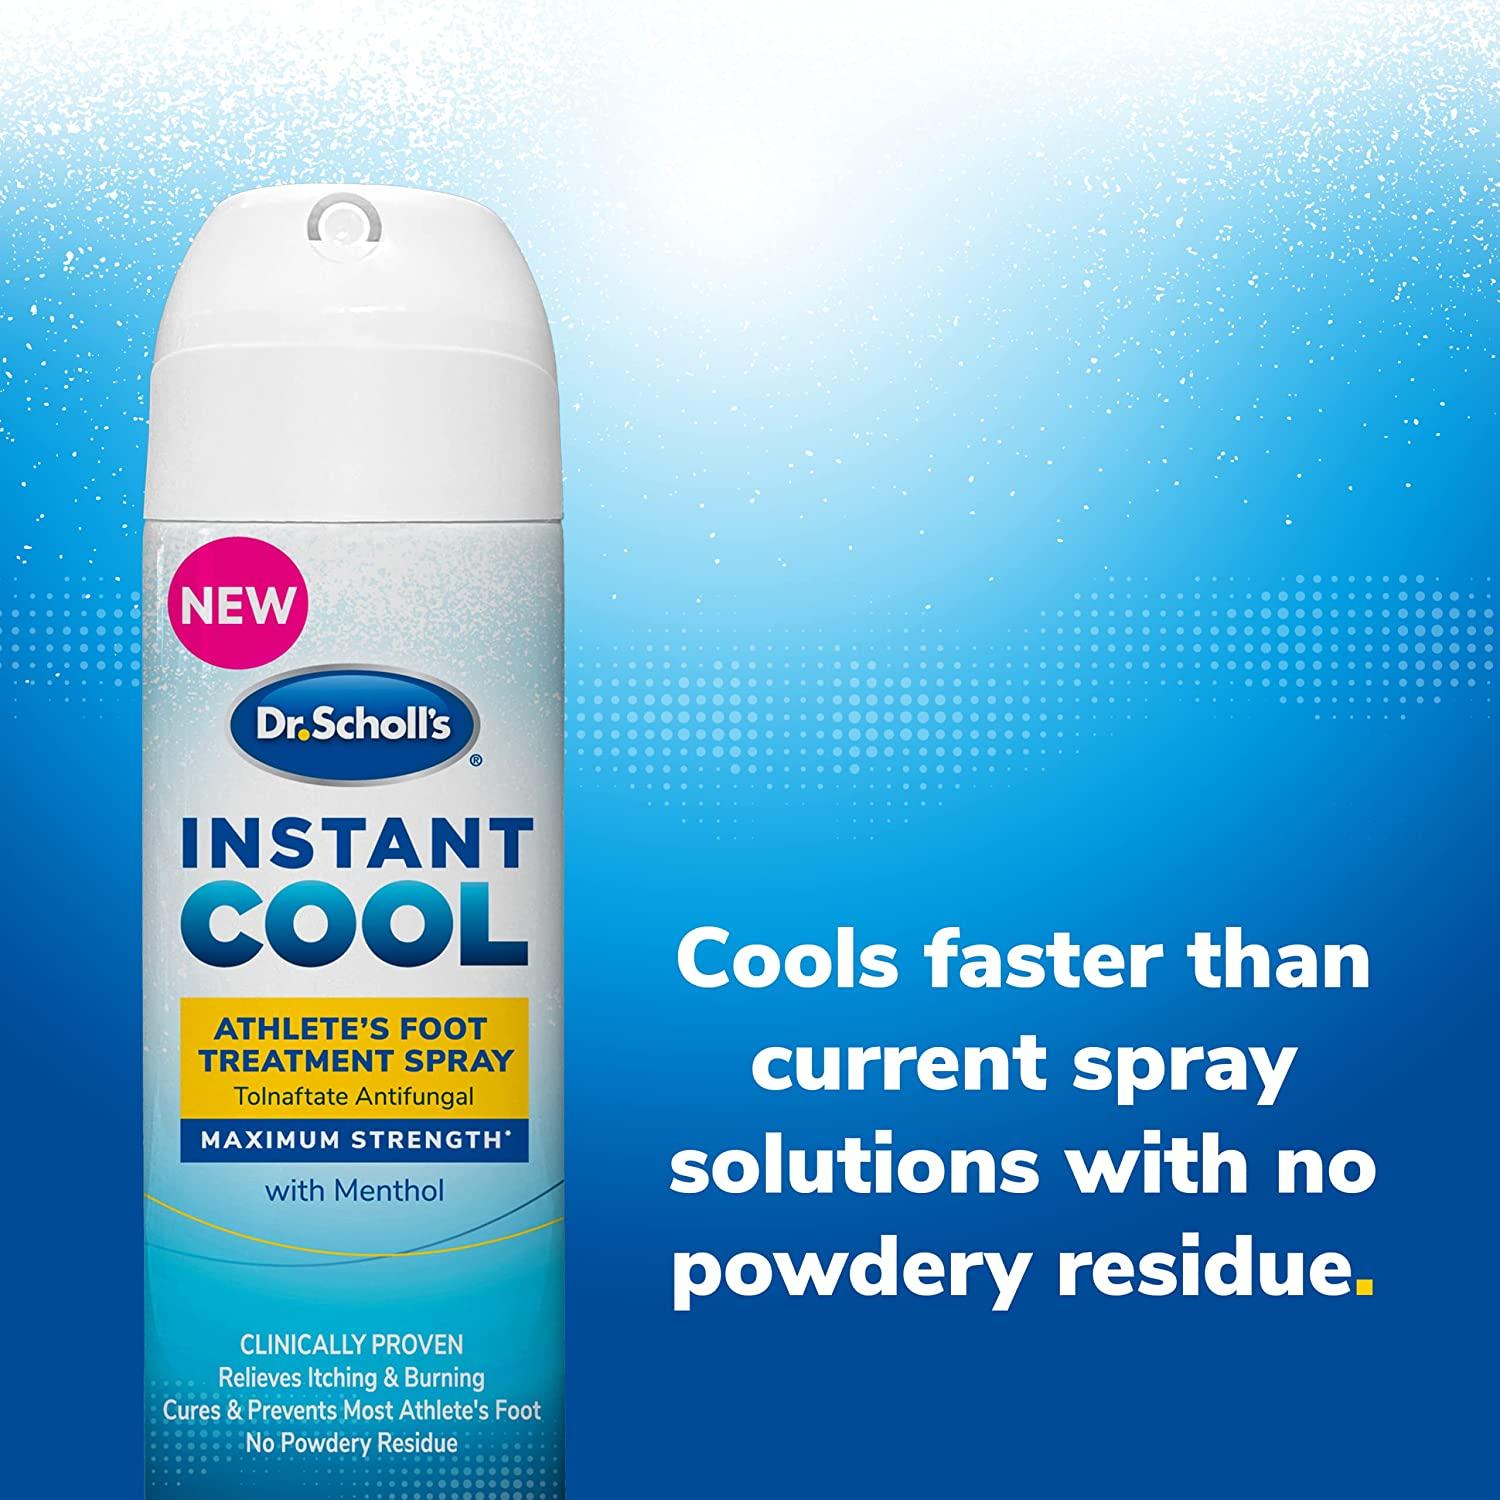 Instant Cool Treatment Spray - Athlete's Foot | Dr. Scholl's